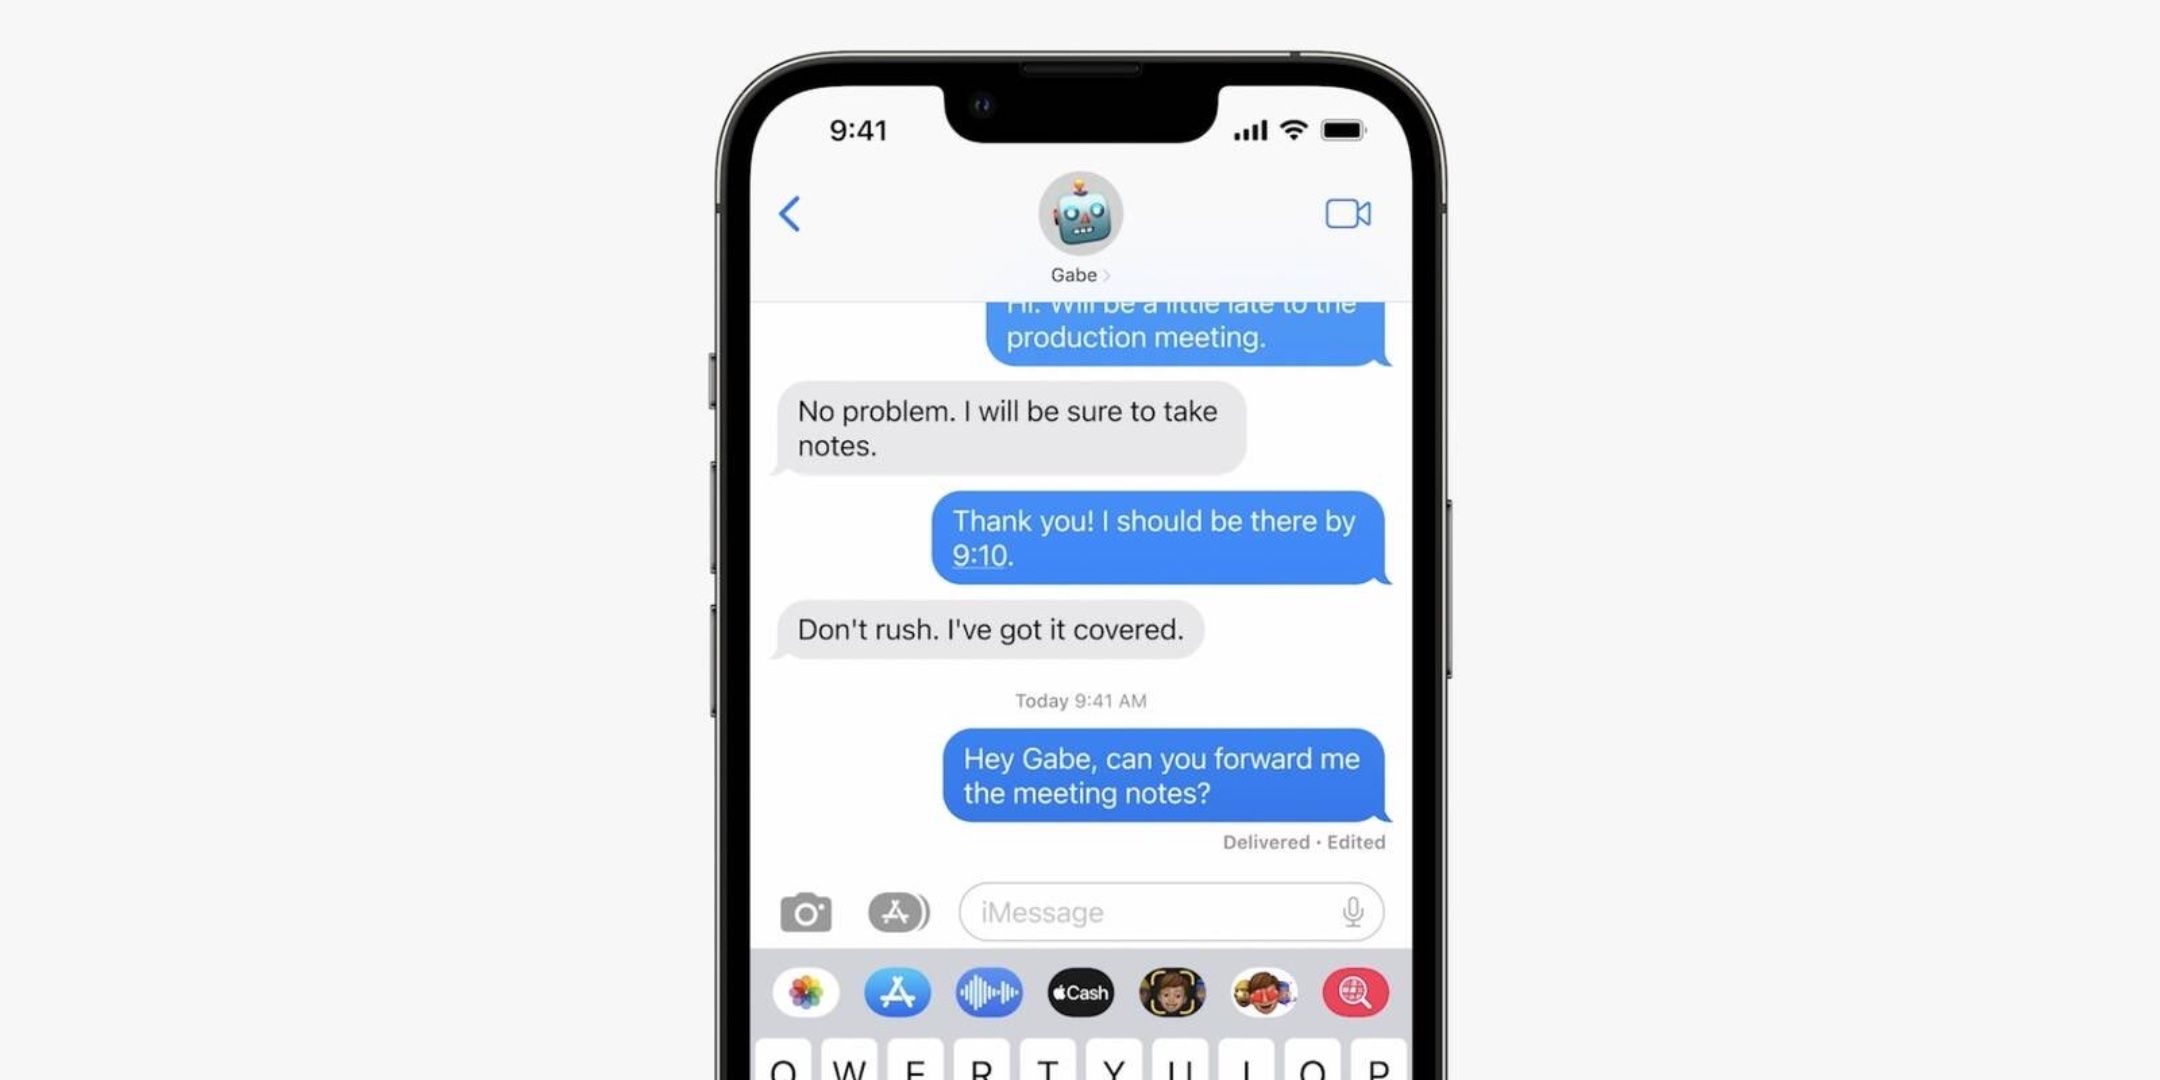 A demo of the edit button to be added to iMessage.